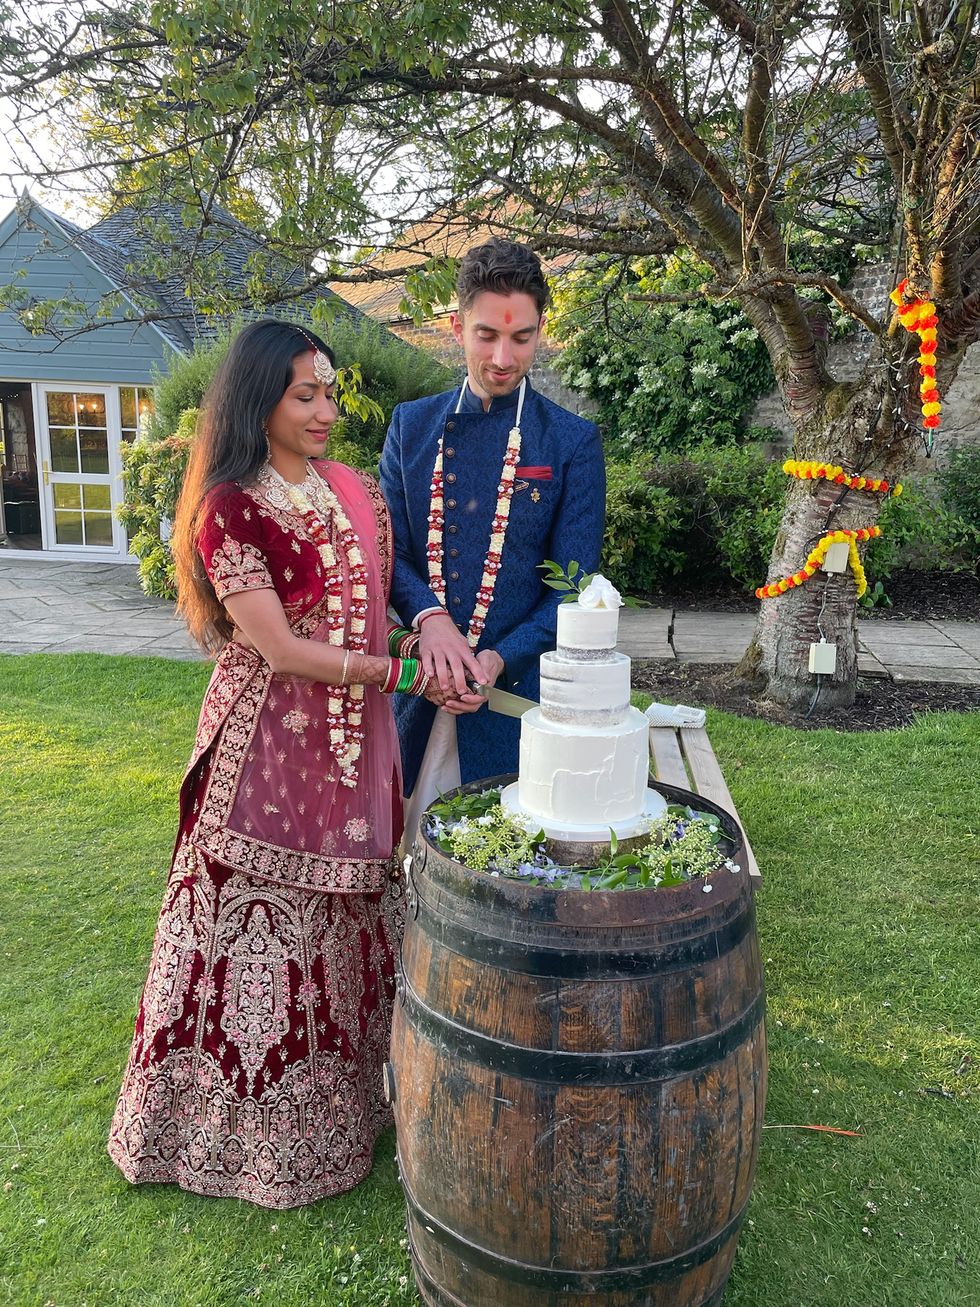 a man and woman standing next to a barrel with a white object on it